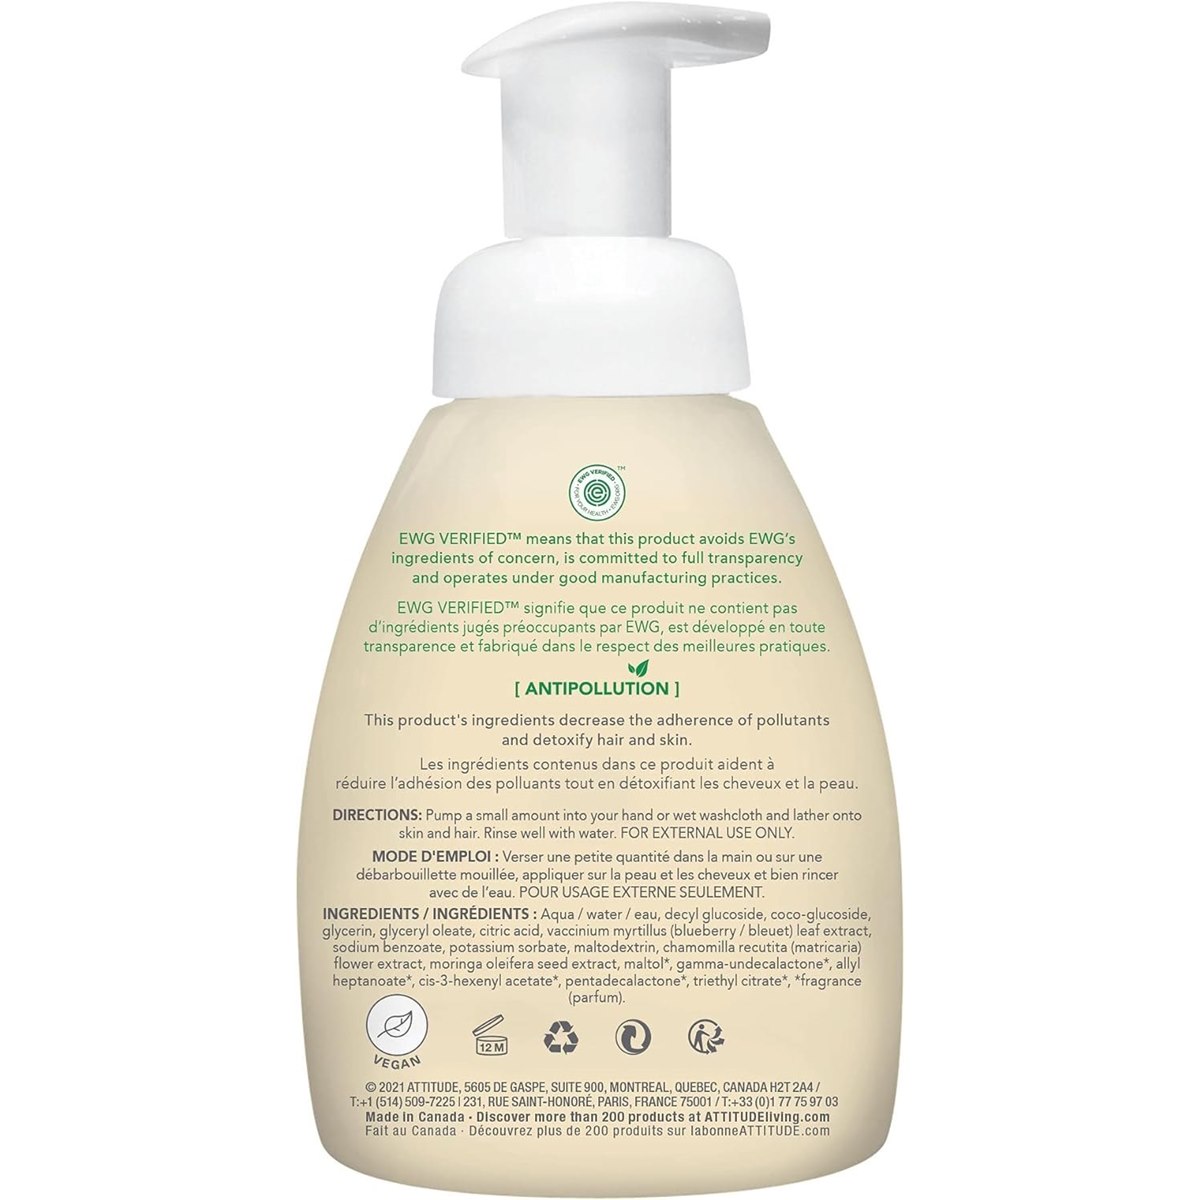 How to apply Attitude Baby Leaves 2in1 Foaming Wash